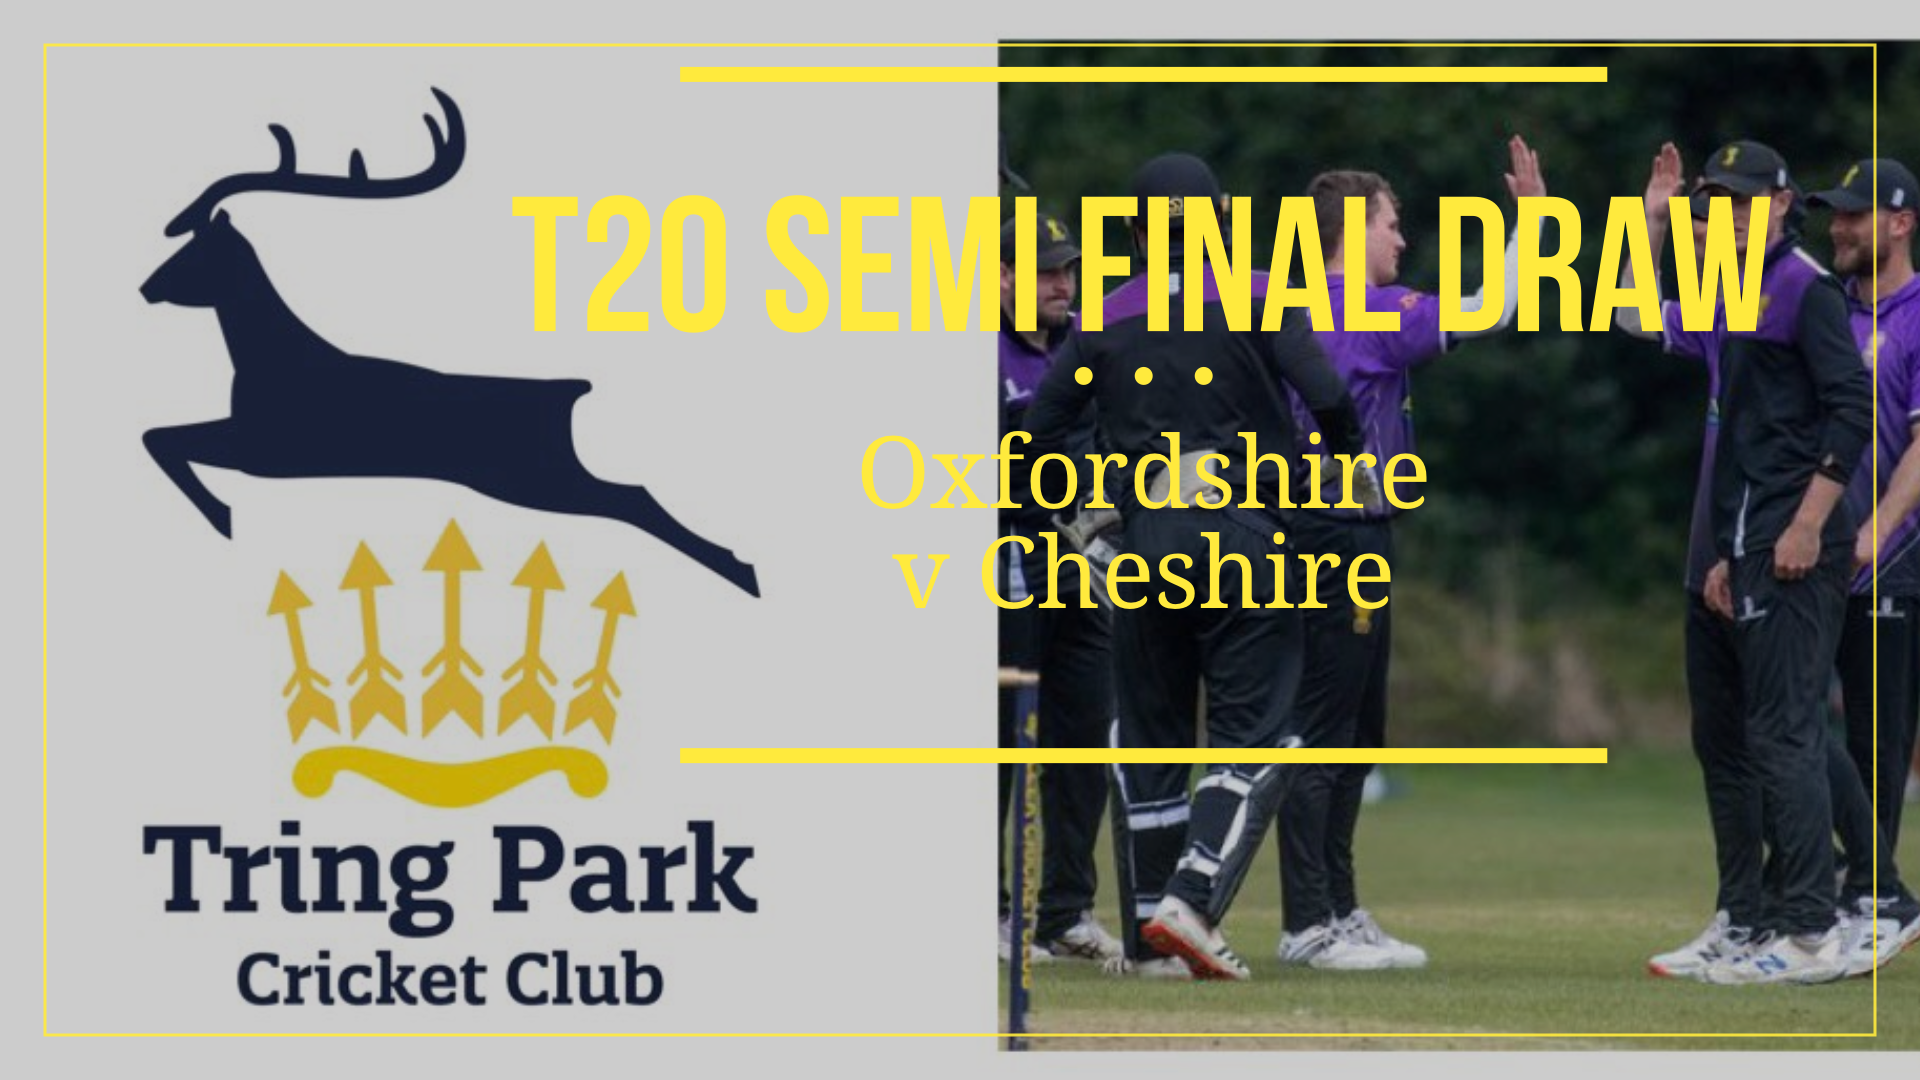 T20 Semi final draw sees Cheshire paired with Oxfordshire